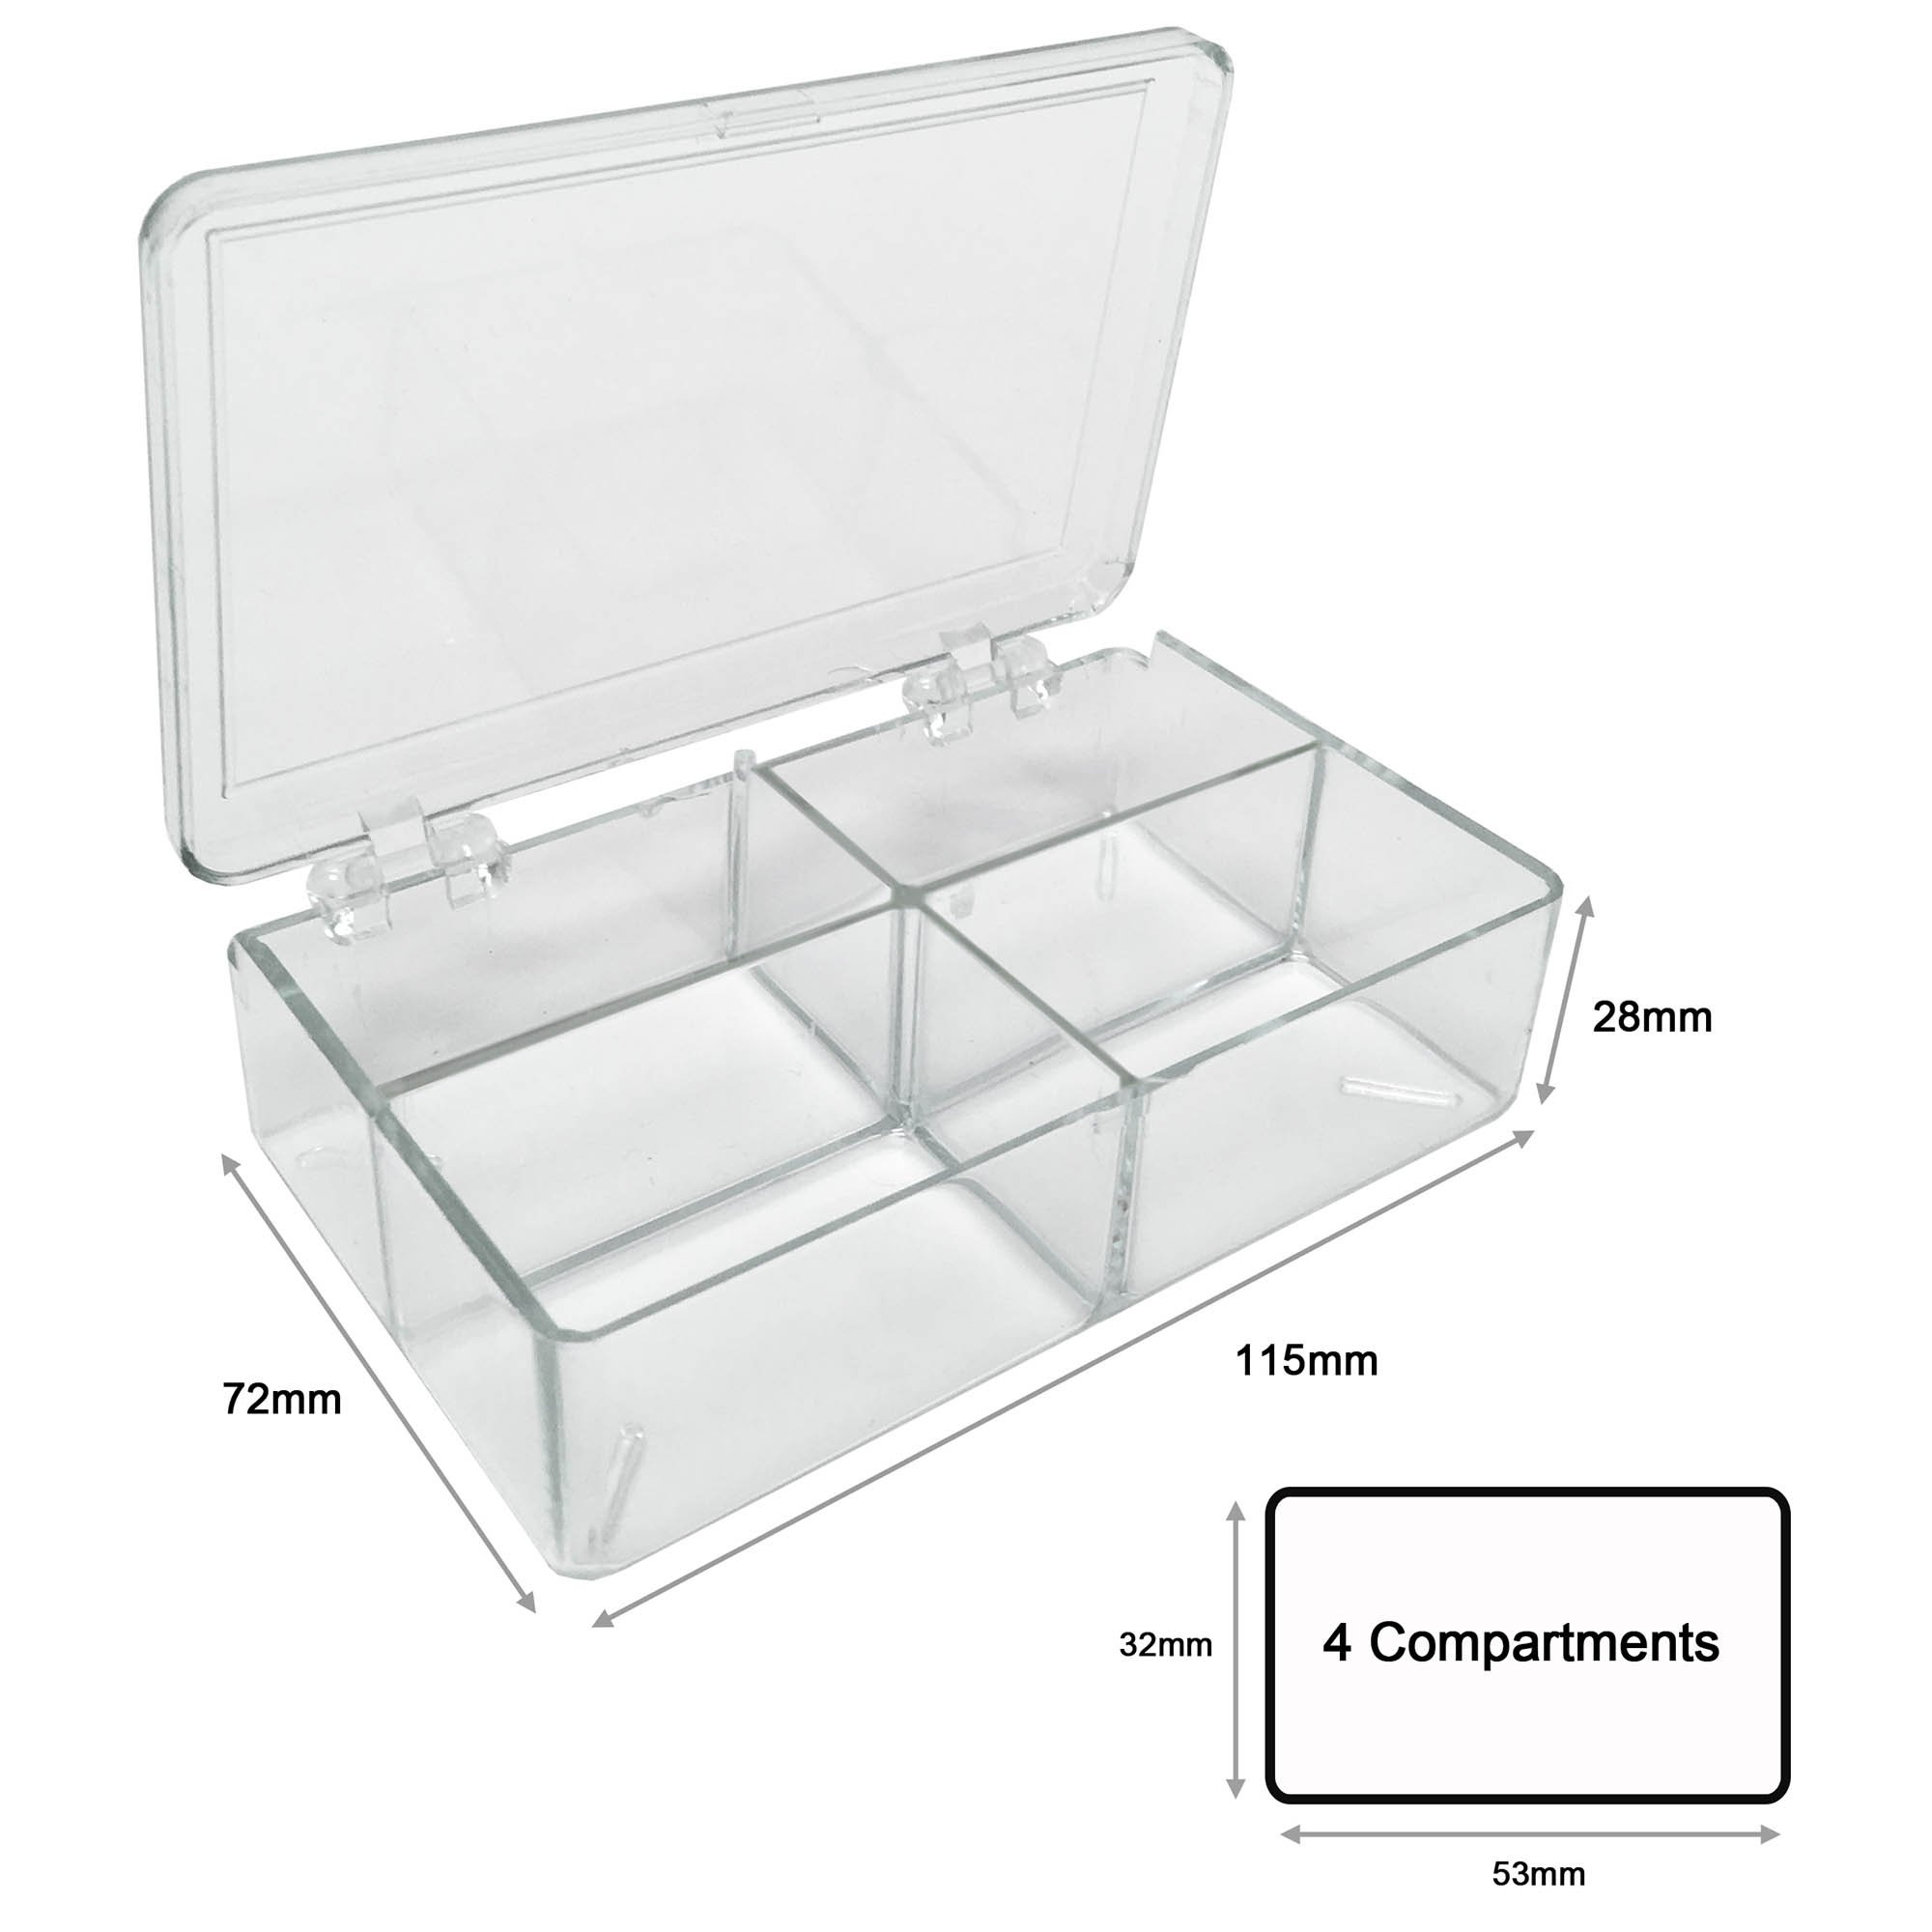 MultiBox Clear Western Blot Box - 4 Compartments 32 x 53 x 28mm Each (Pack of 6)